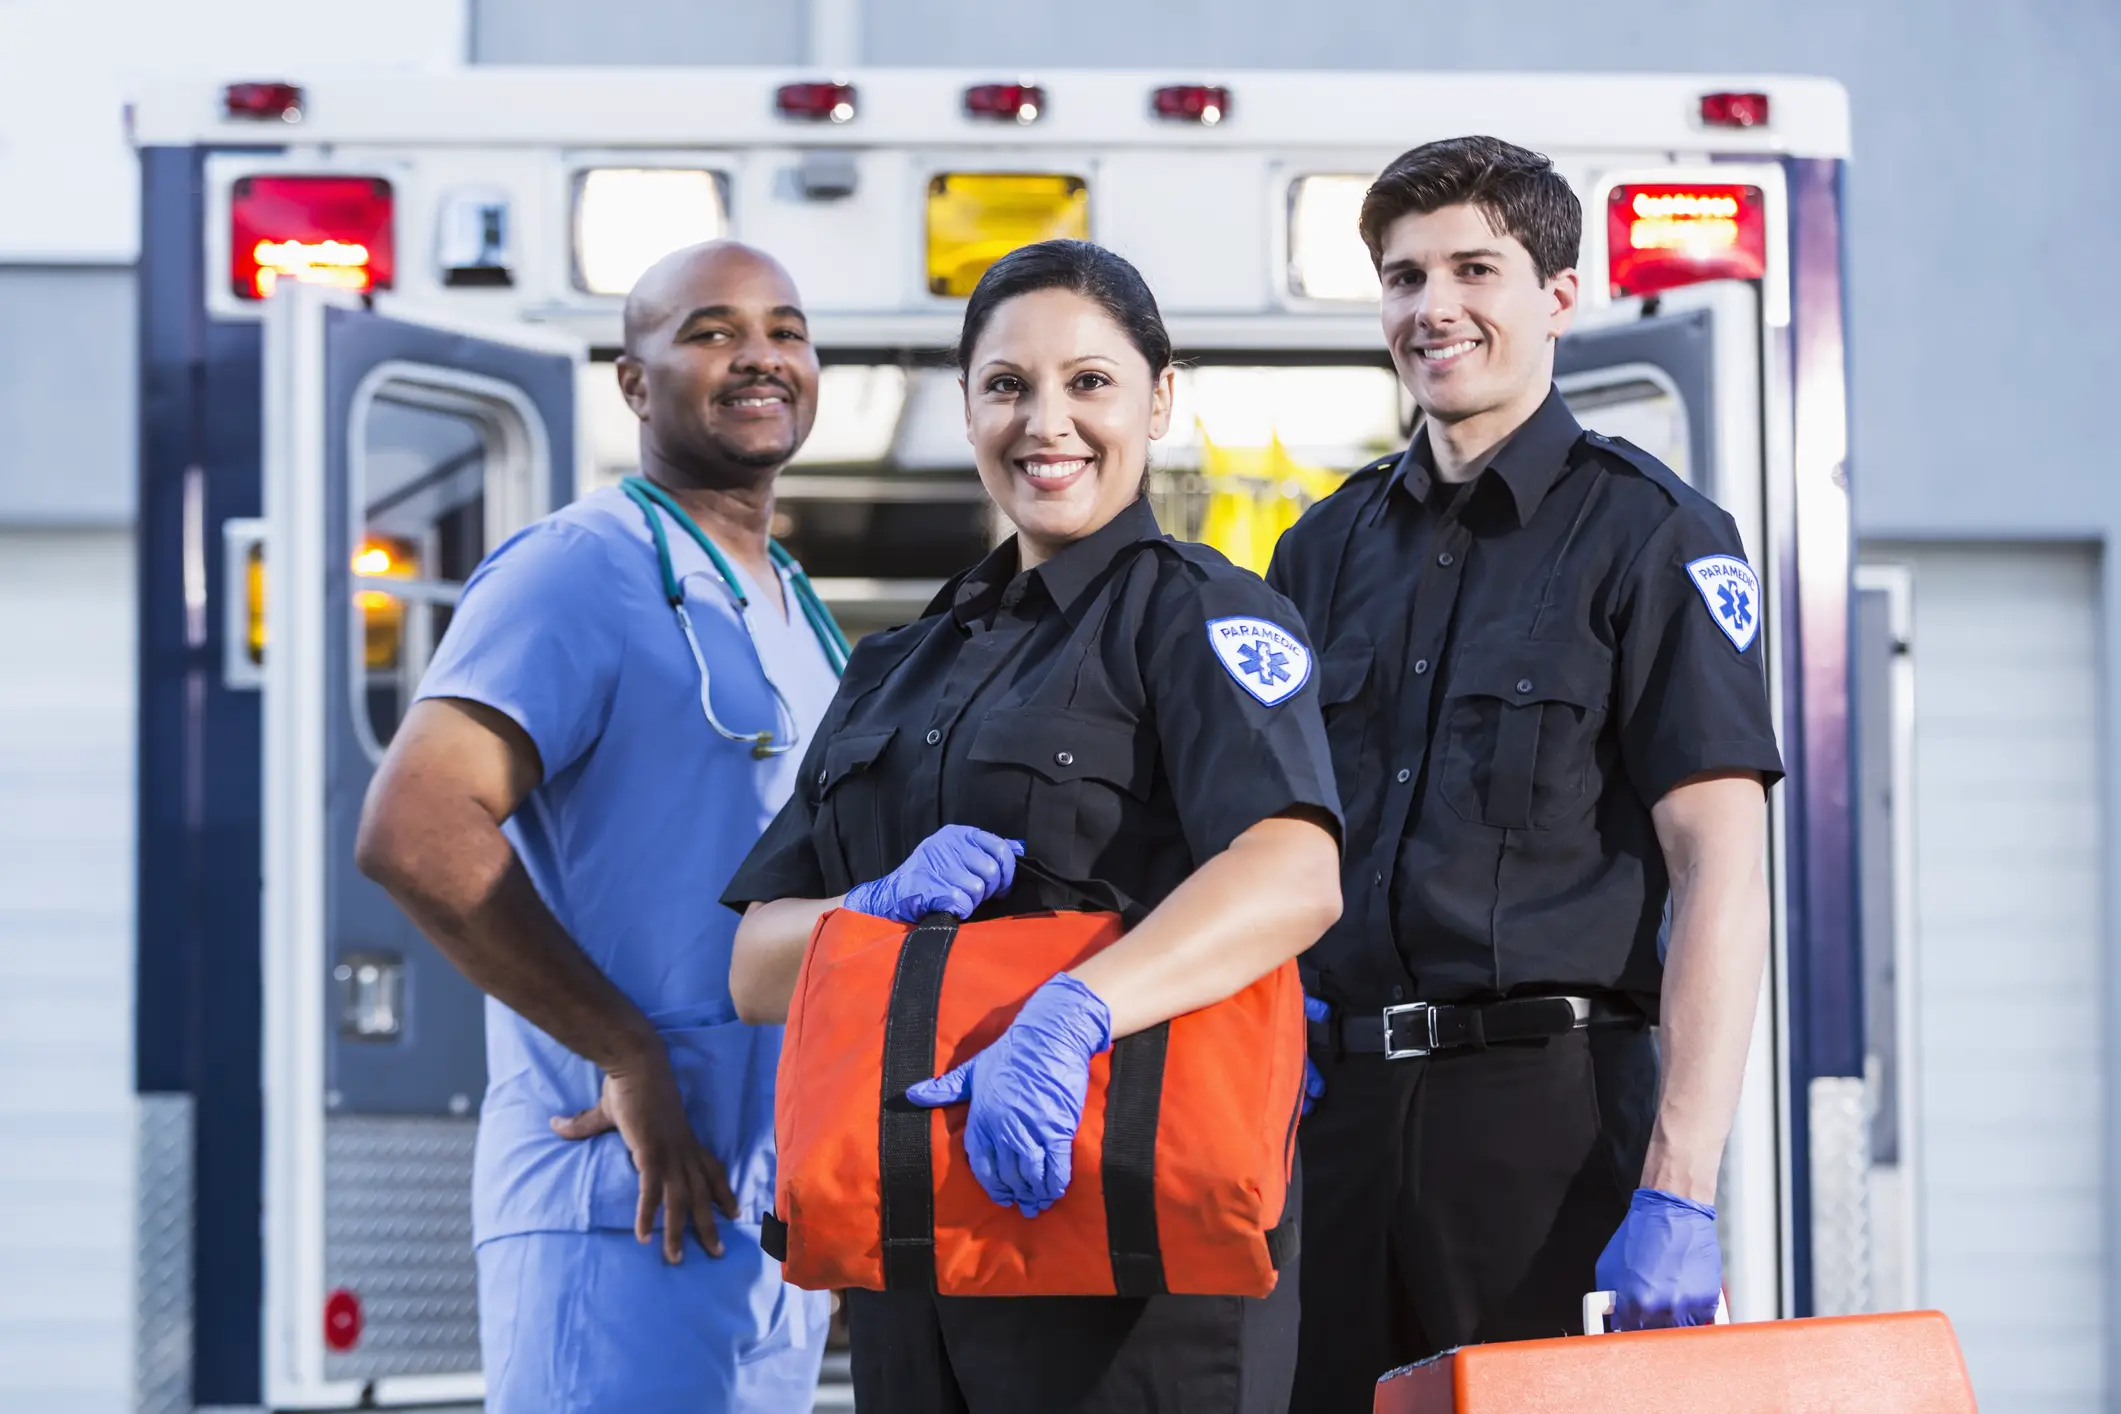 How To Become An EMT